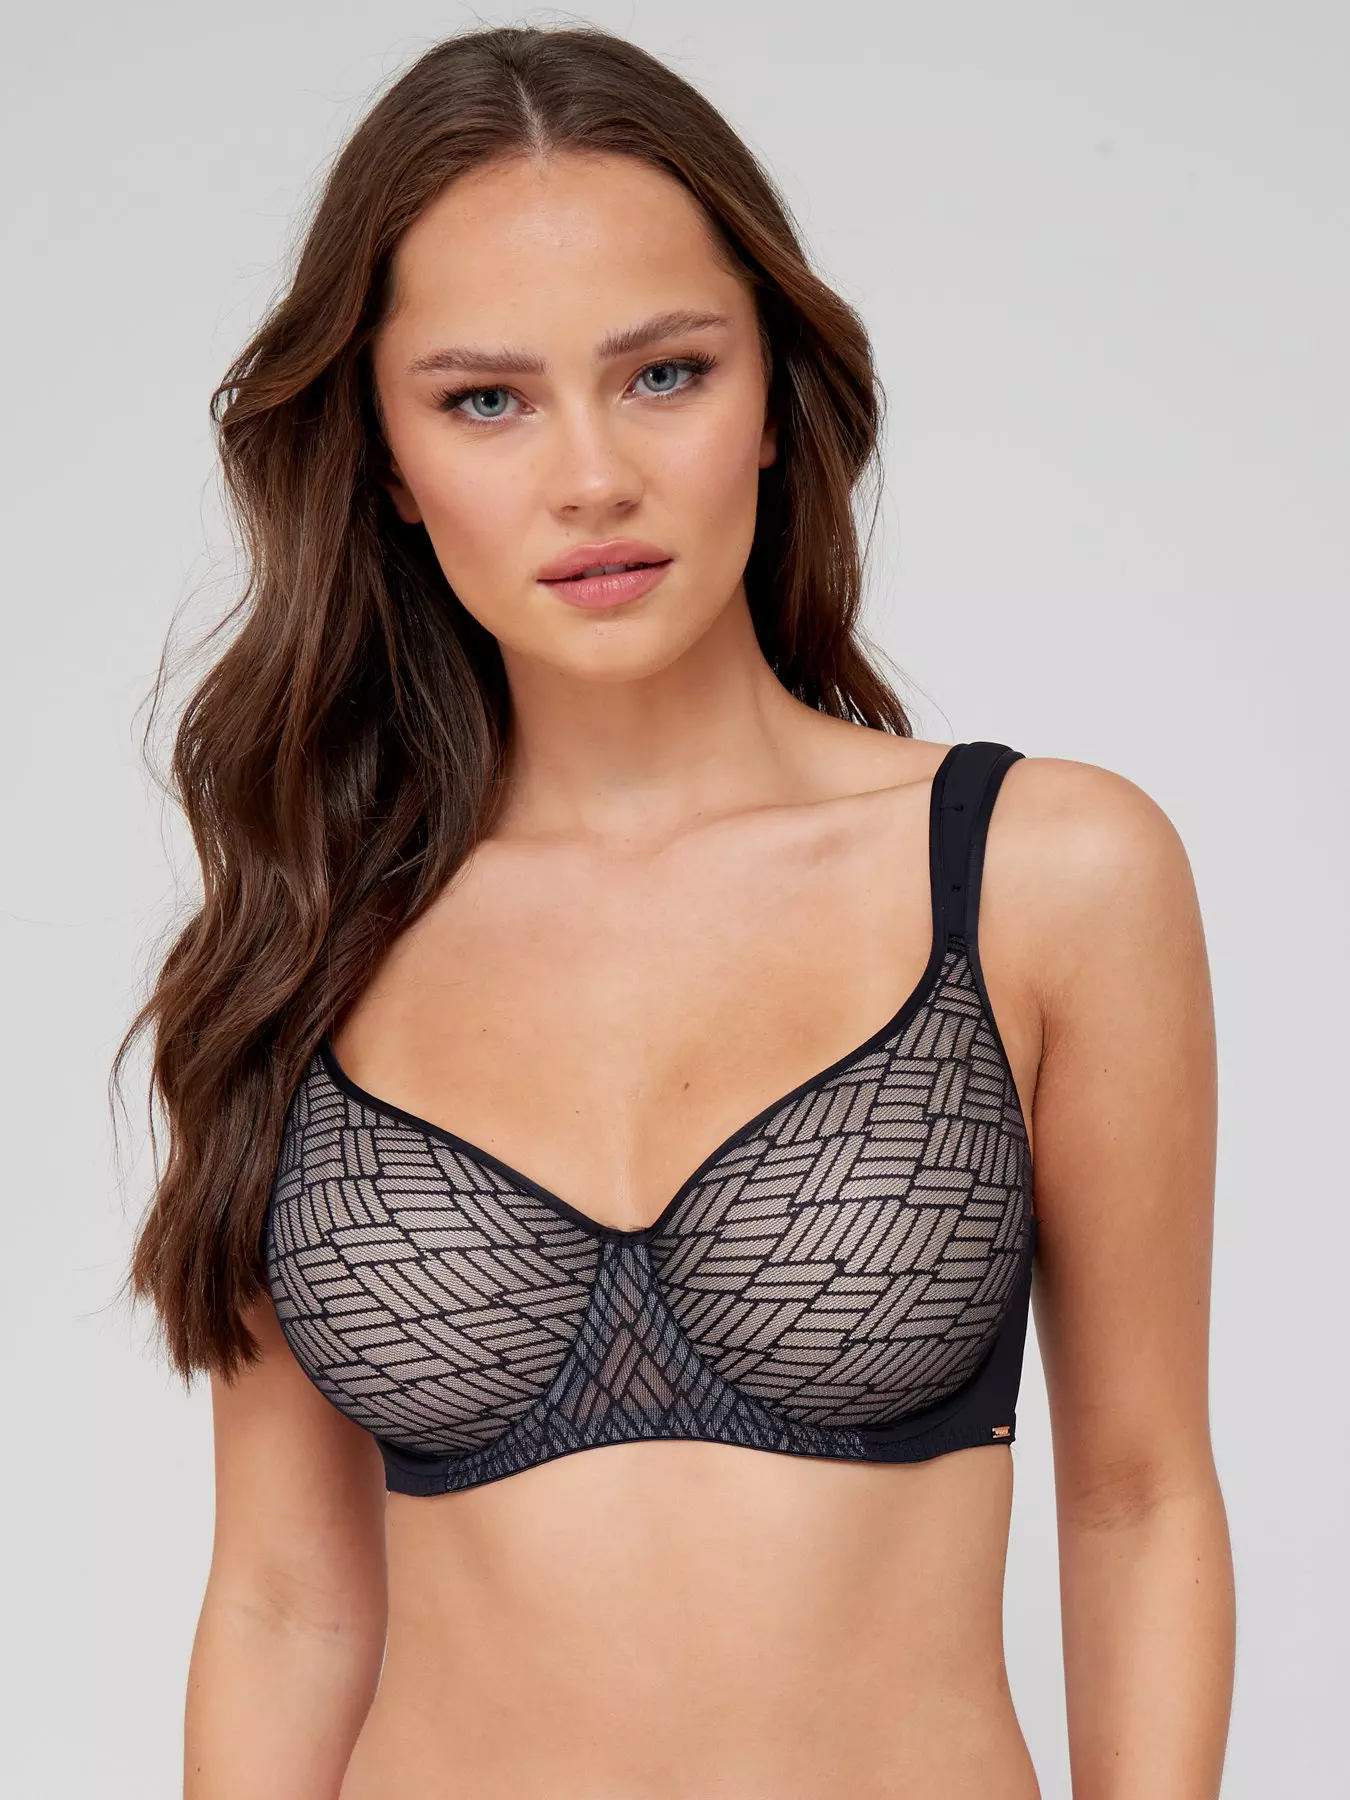 Savoir Faire Sheer Underwire Bra - For Her from The Luxe Company UK